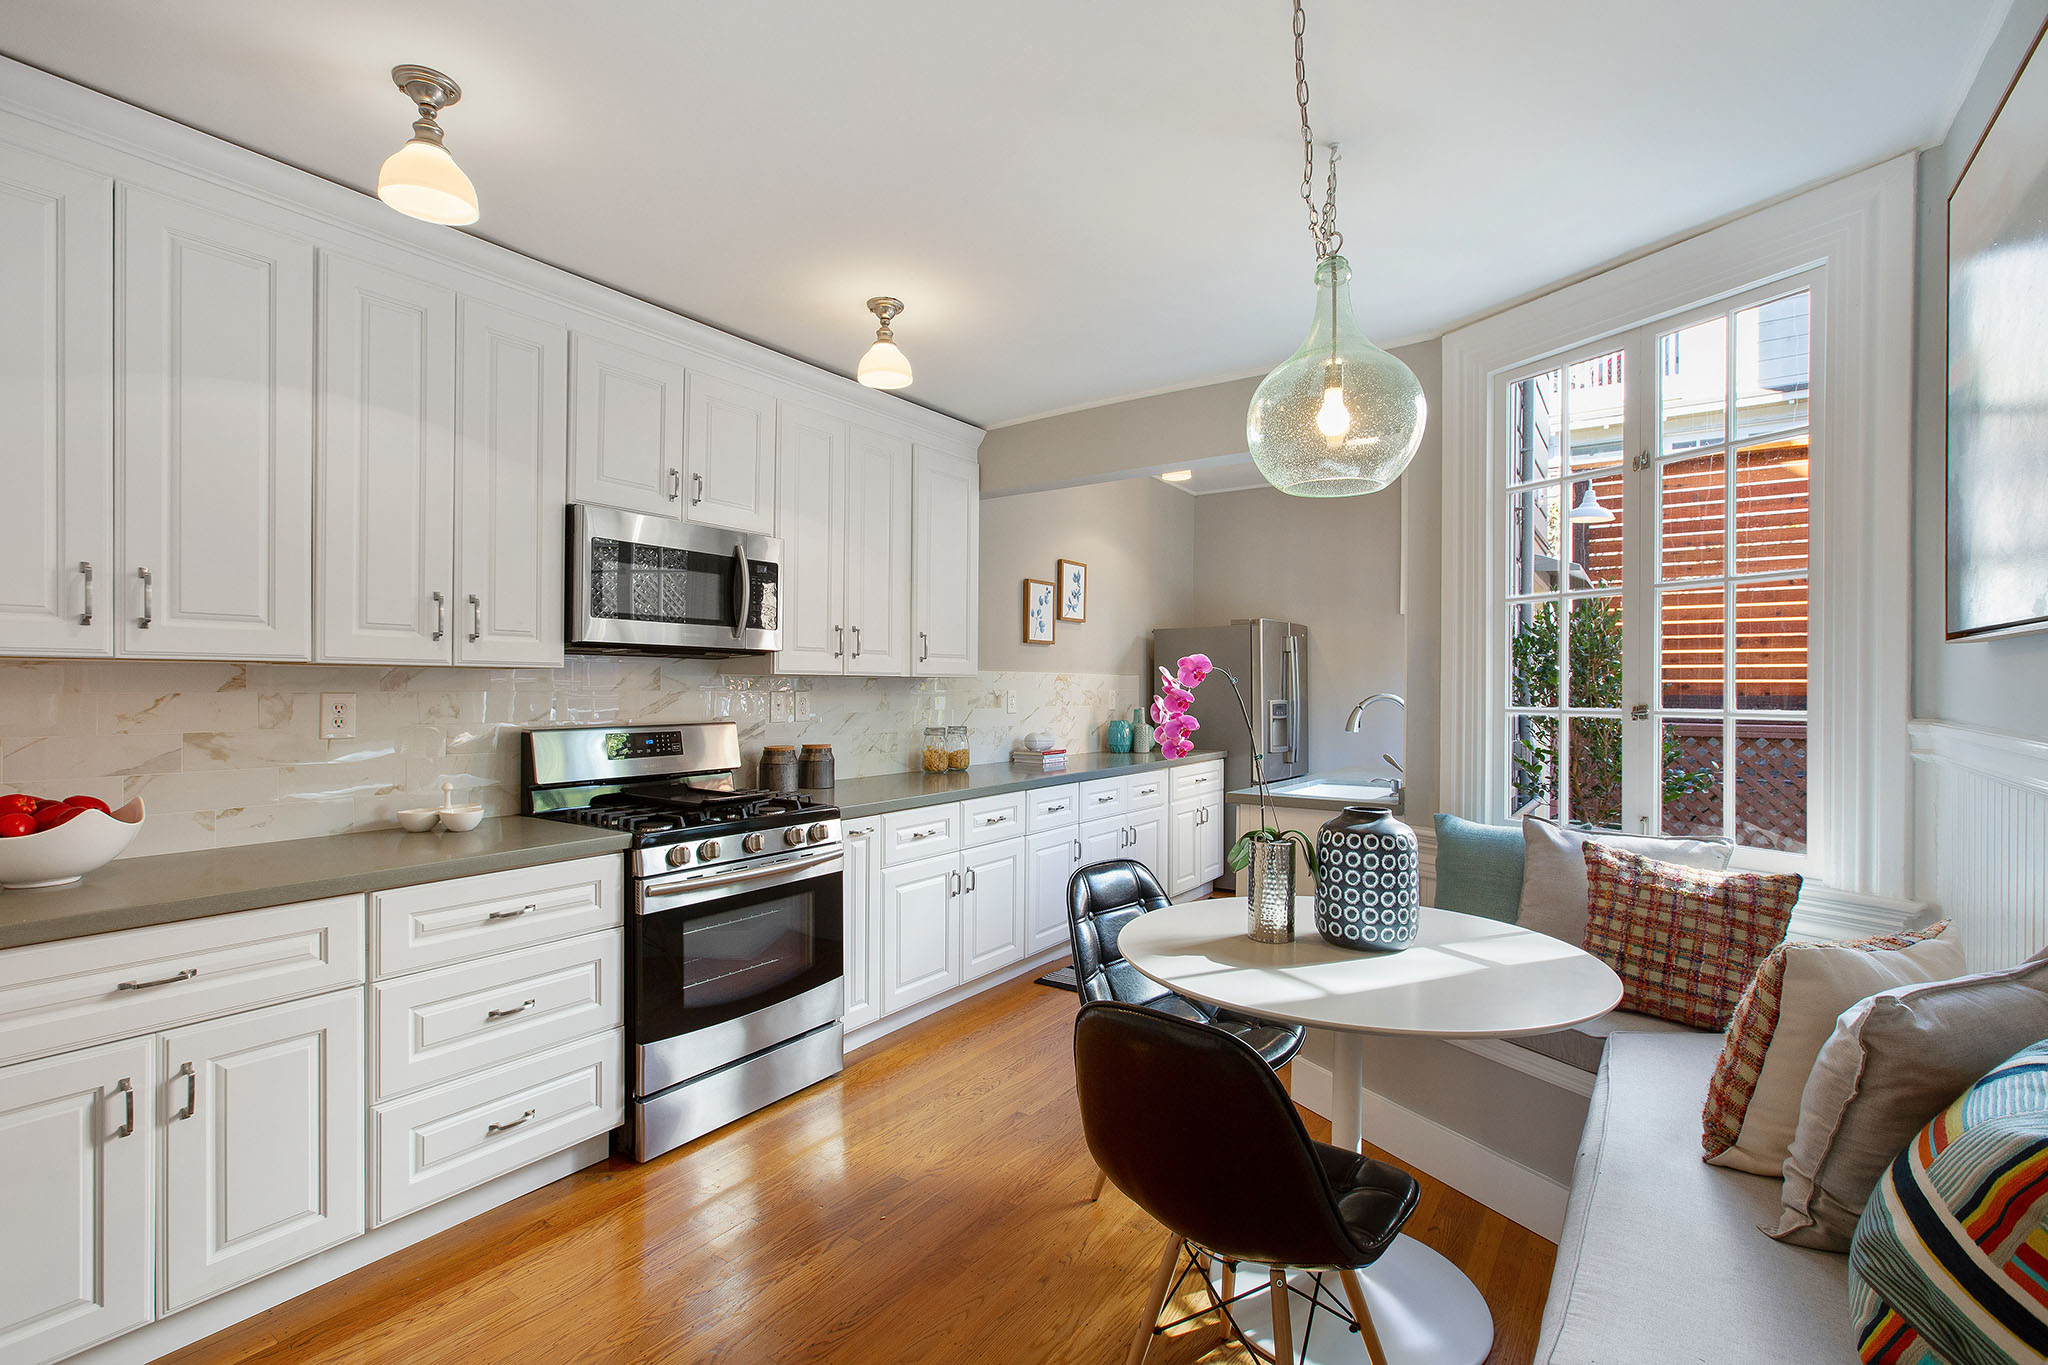 Property Photo: View of the kitchen, featuring a long row of white cabinets and wood floors